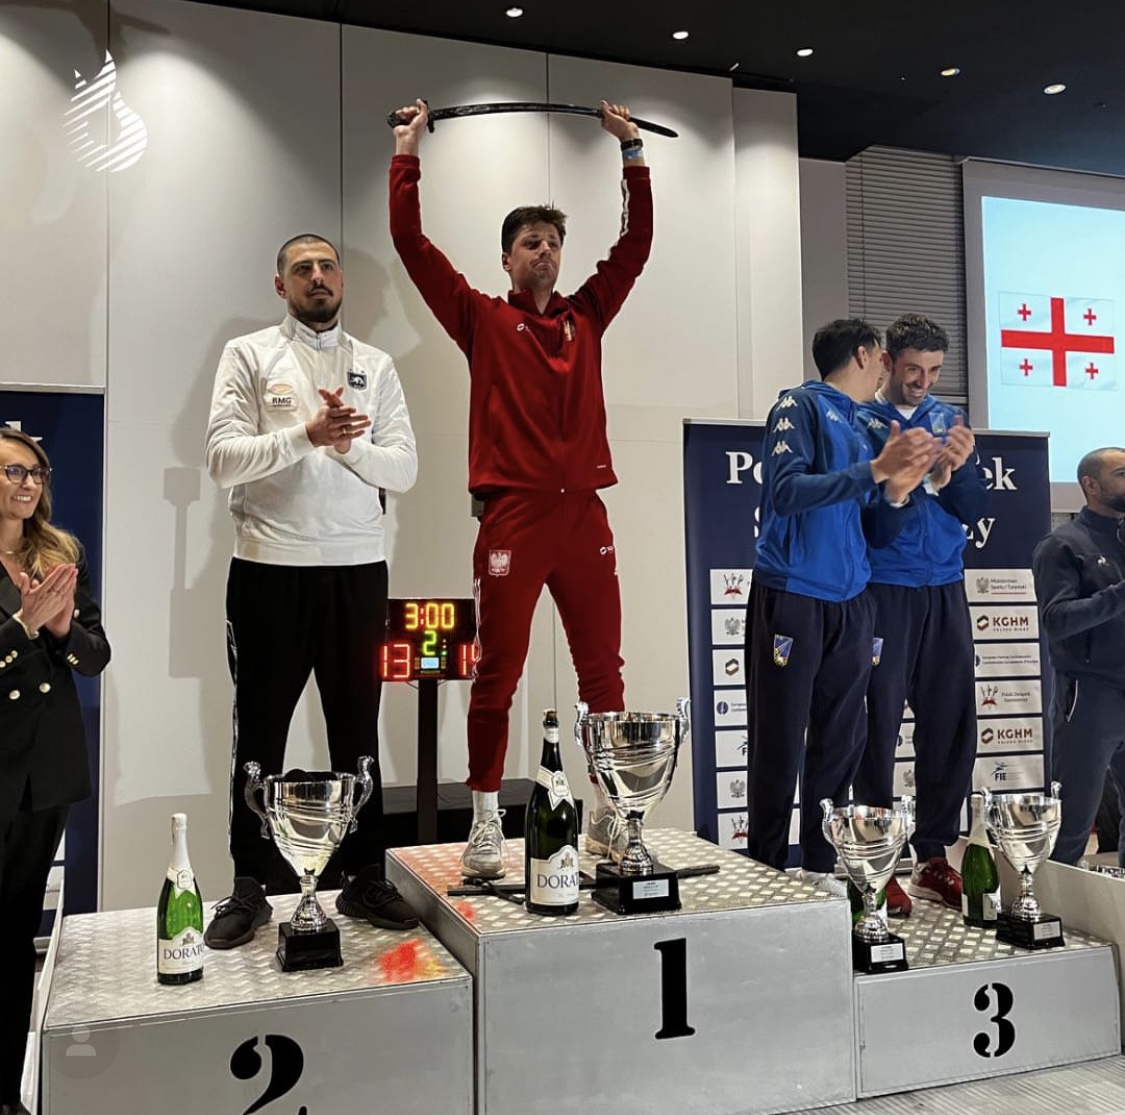 Sensational victory of a Pole in the fencing World Cup “Sabre de Wolodyjowski”!